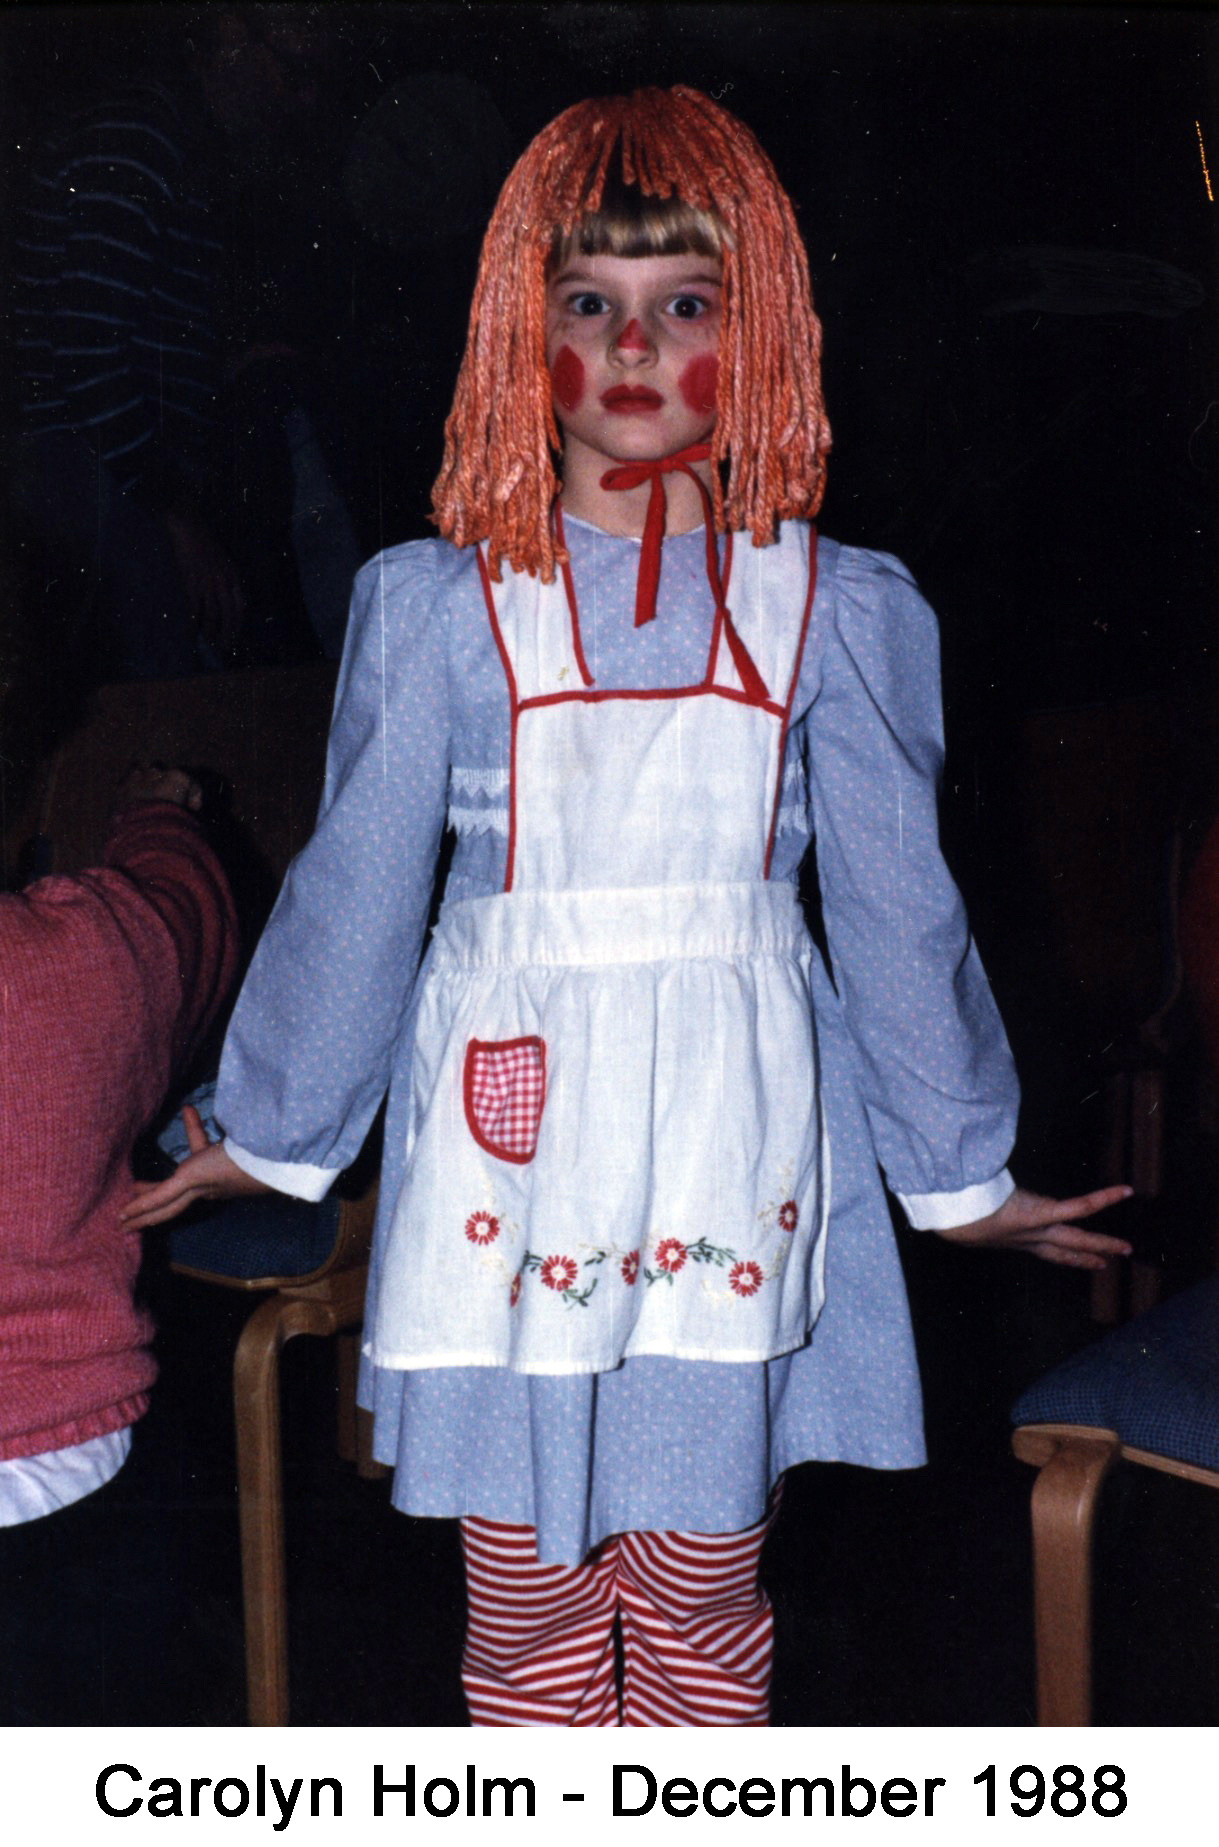 She is posed for the camera with her checks bright red, an orange wig, a             blue dress, with red-and-white candy cane stockings